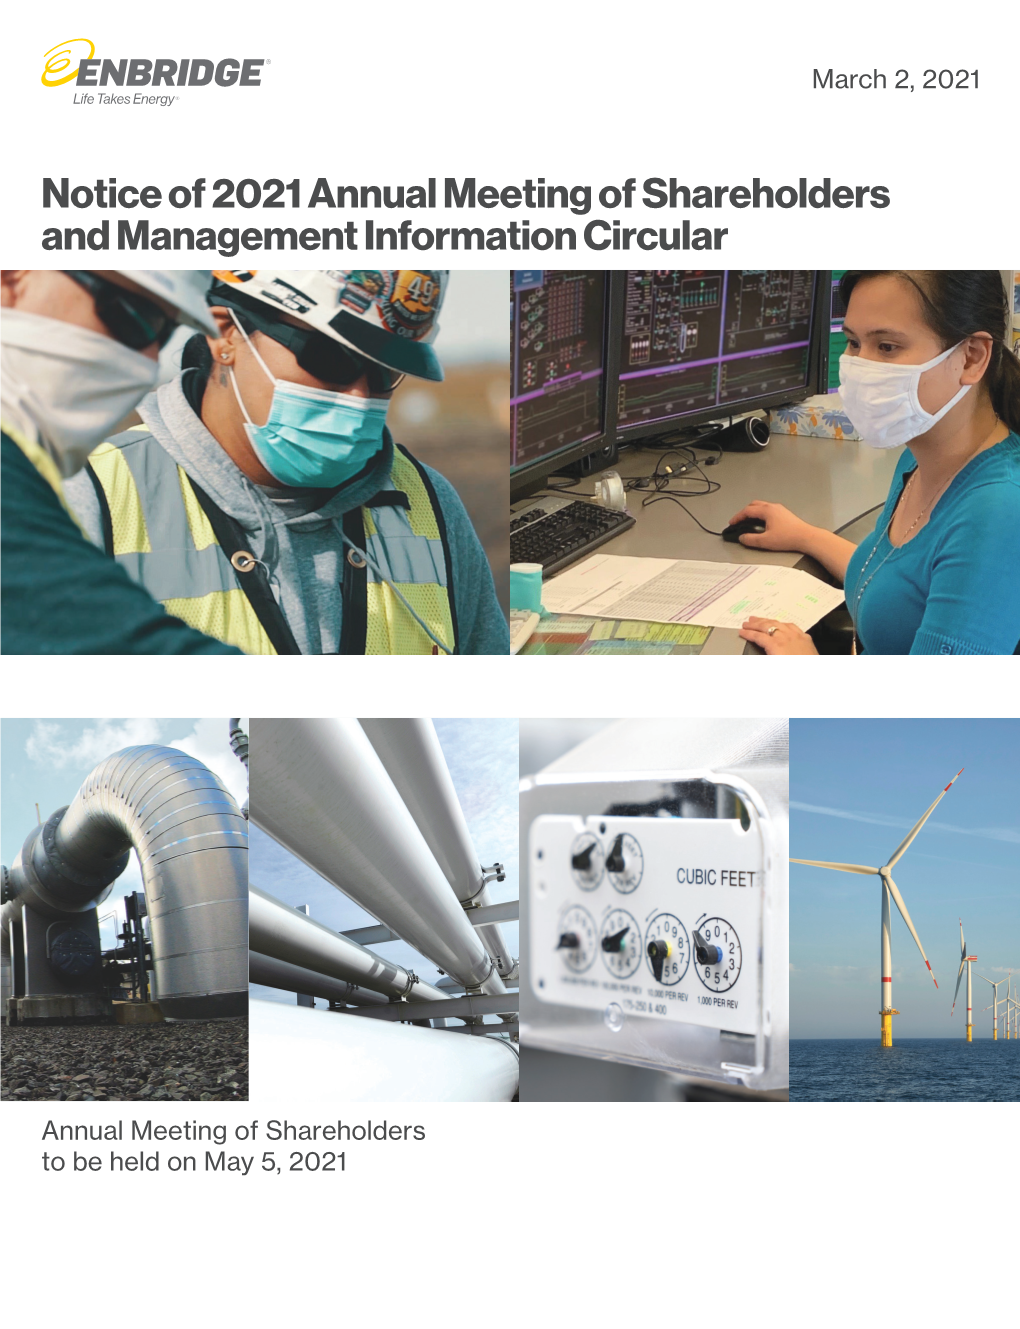 2021 Annual Meeting of Shareholders and Management Information Circular